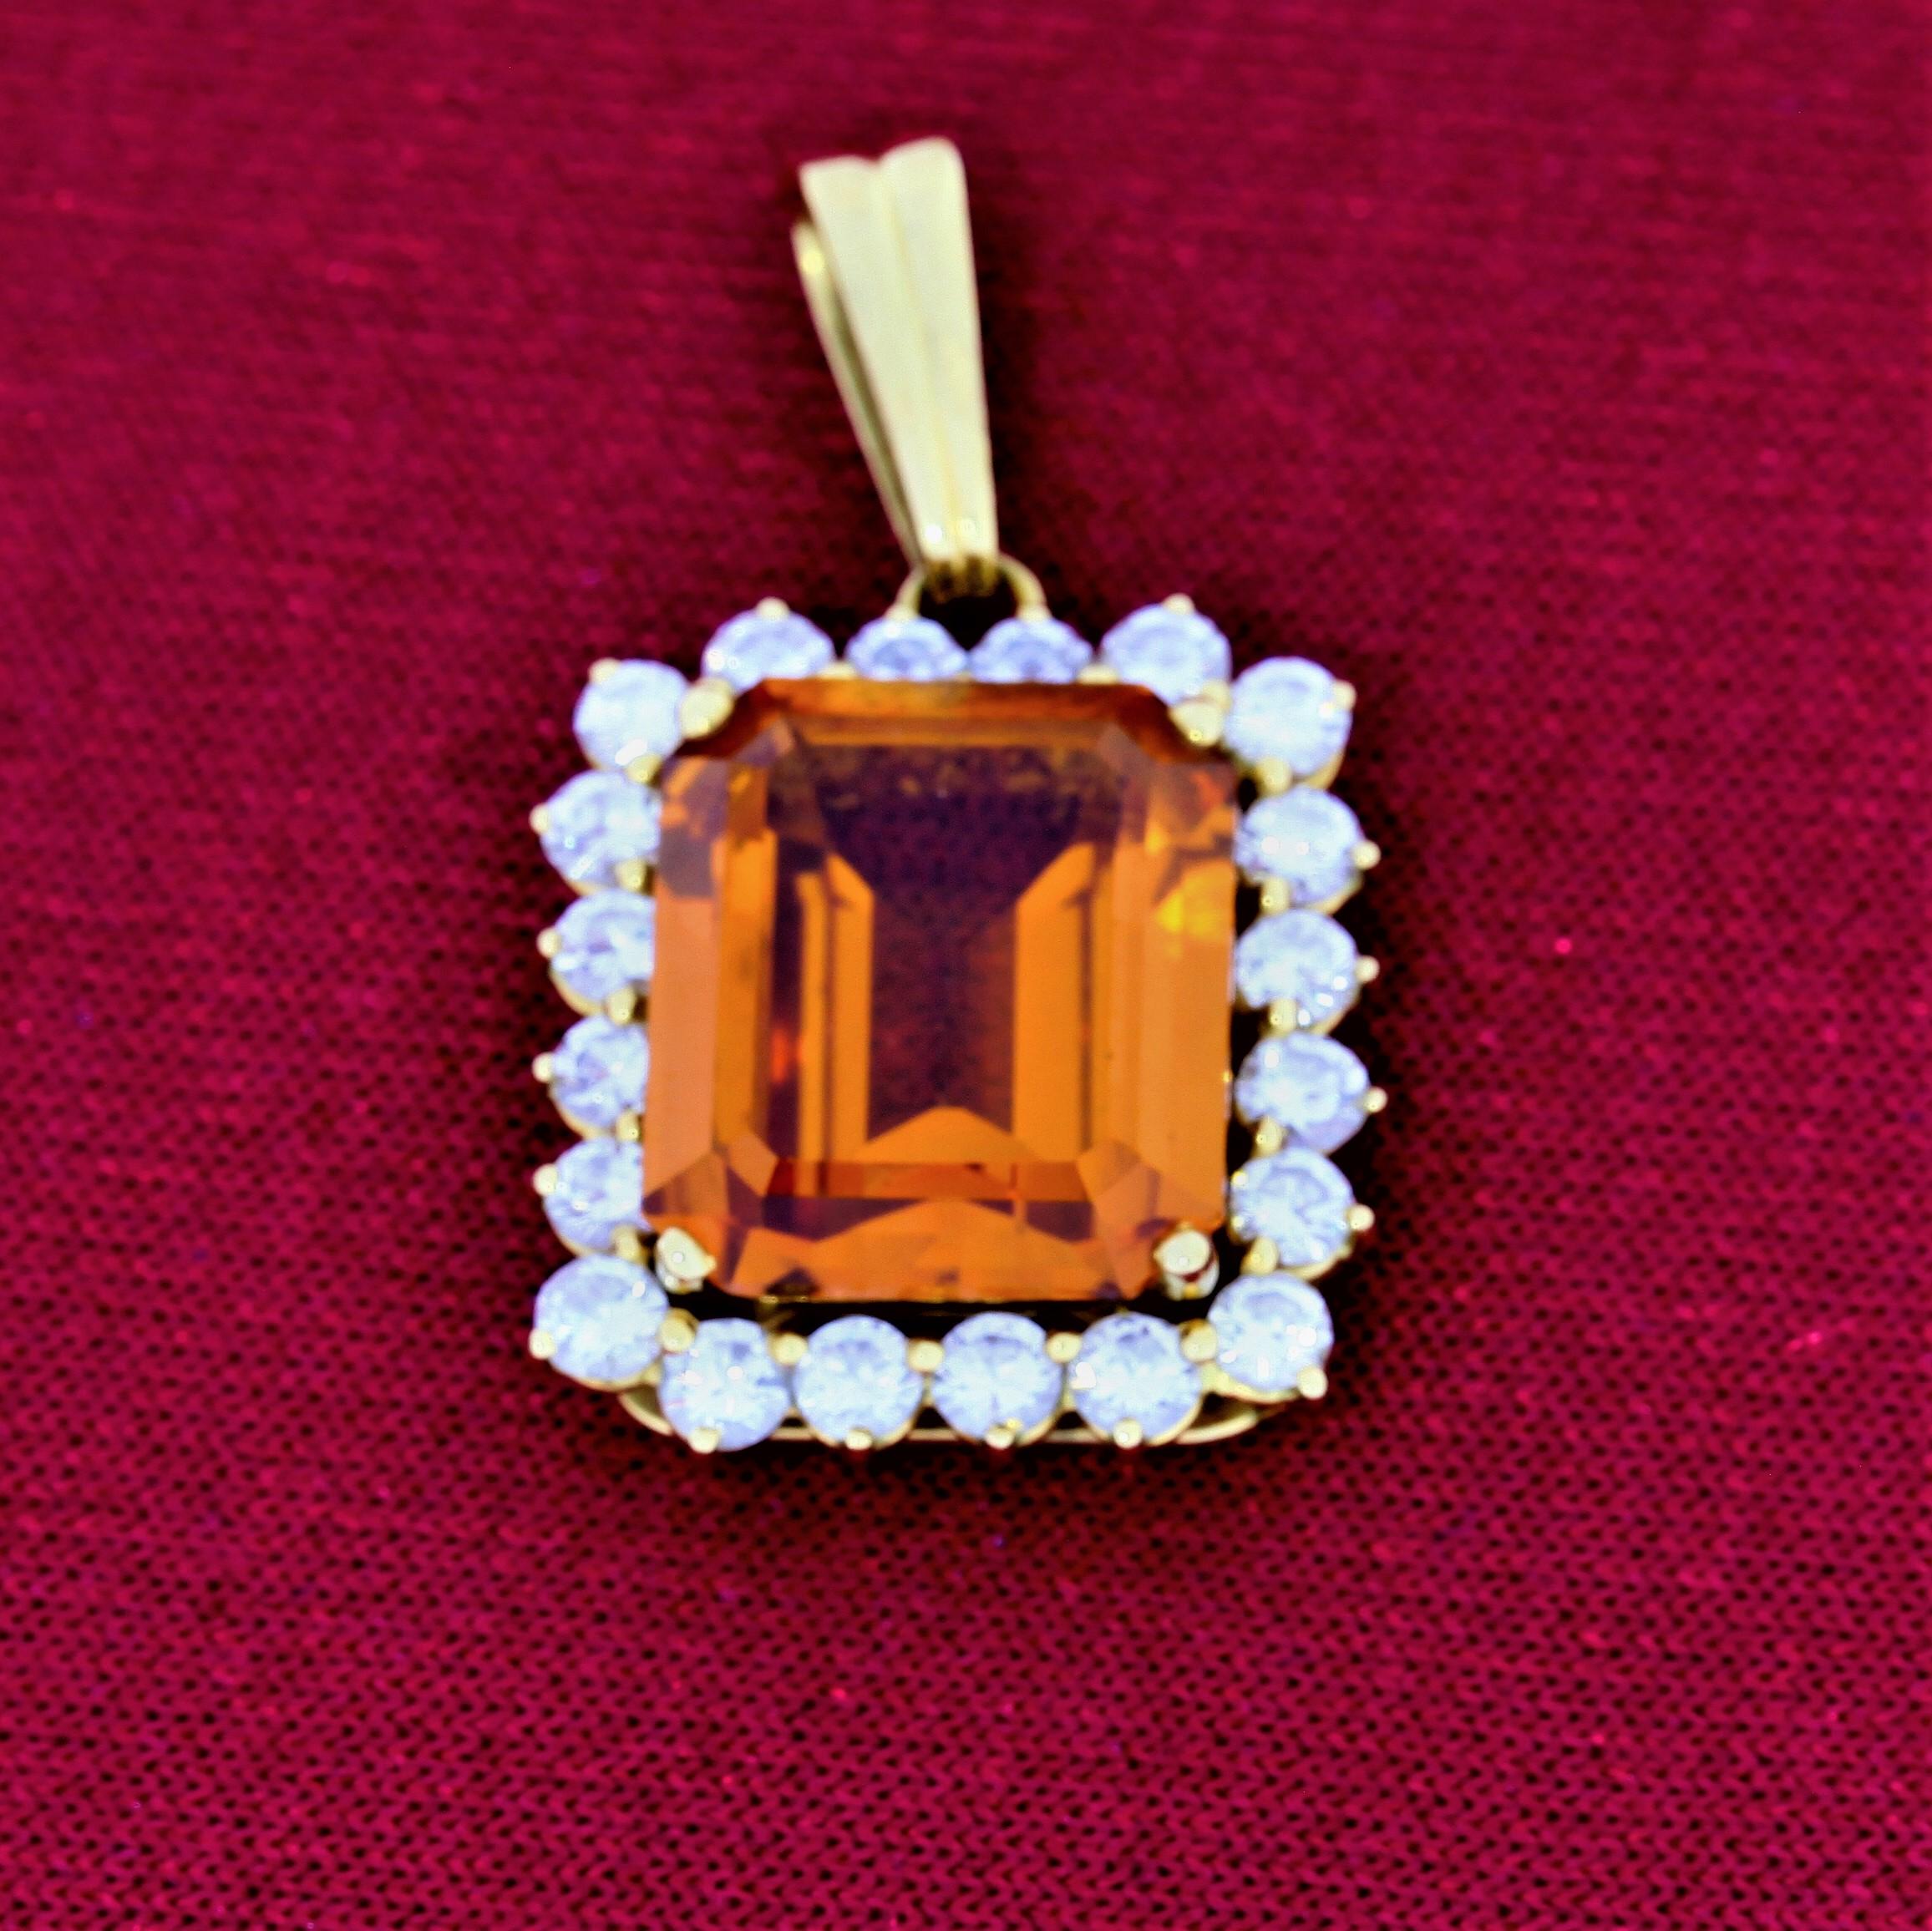 This 1970s vintage orange sapphire pendant is stamped 750 for 18 karat gold. The sapphire weighs approximately 10 carats, orange of medium strong saturation, with good transparency and minor abrasions. Diamonds bright and lively. Sapphire weighs